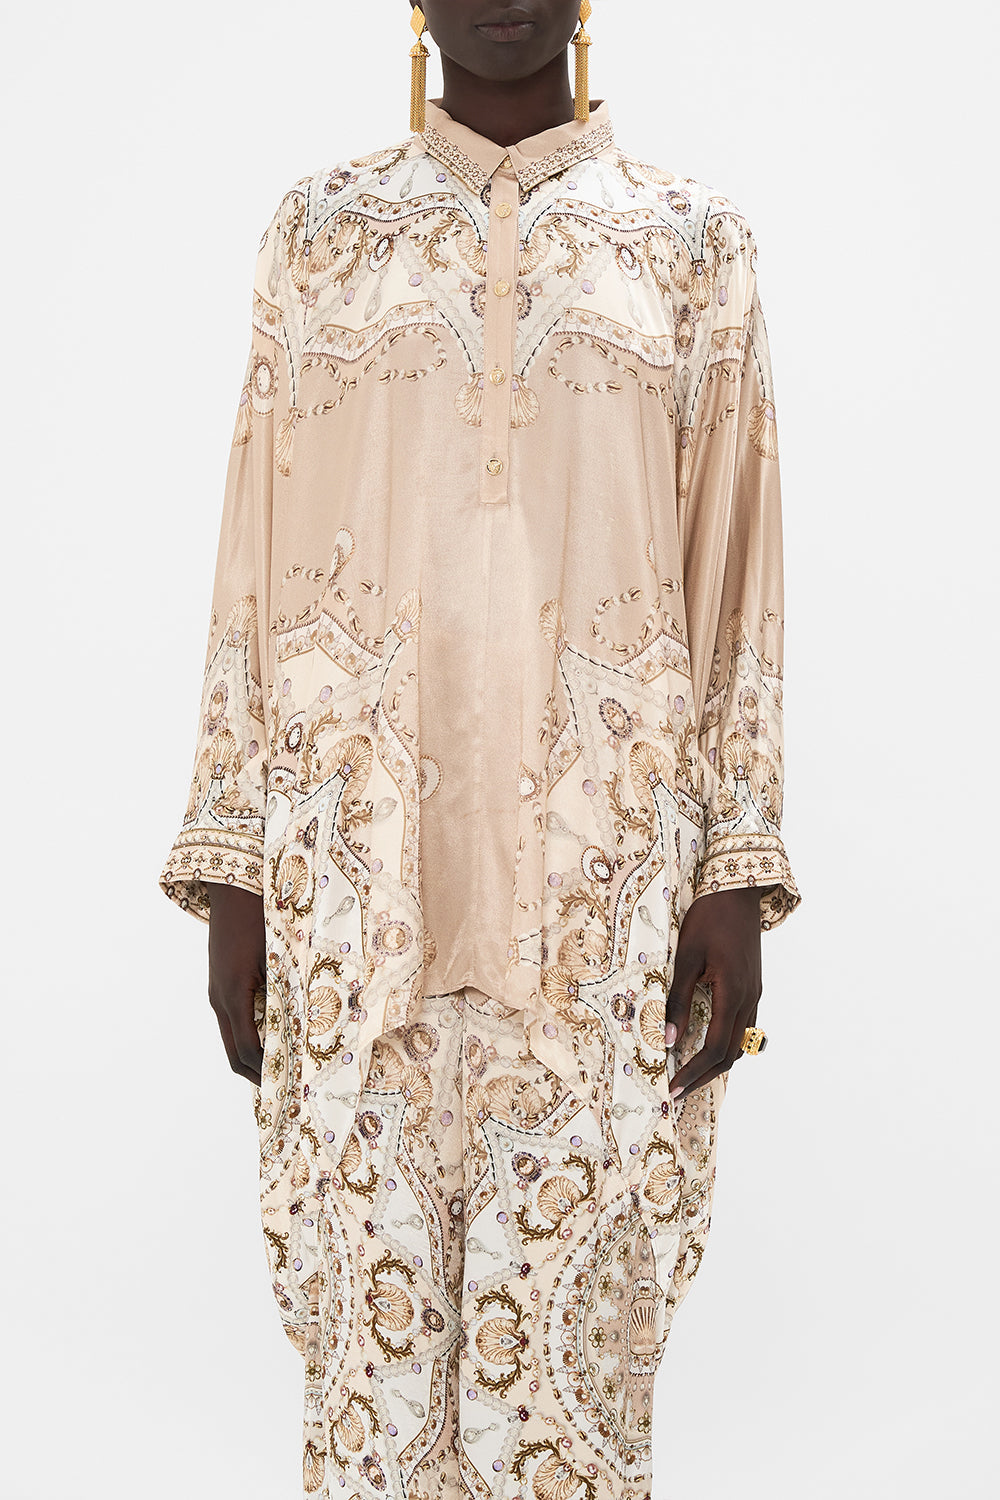 CAMILLA button up top in Grotto Goddess print